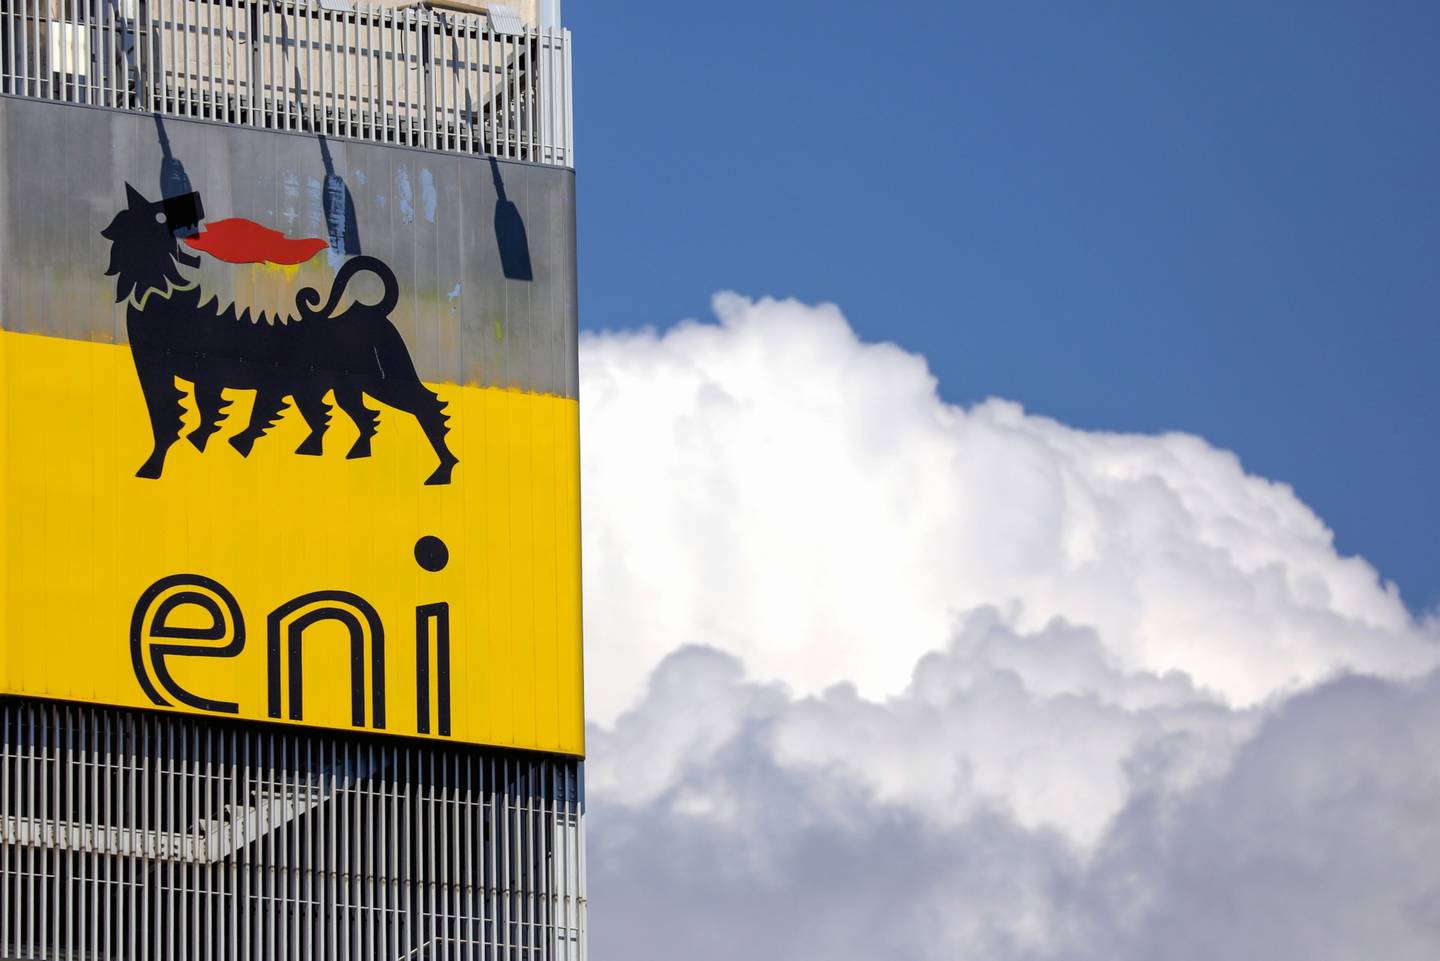 Italy’s Ente Nazionale Idrocarburi (ENI) has announced a new crude oil discovery in the Gulf of Mexico.